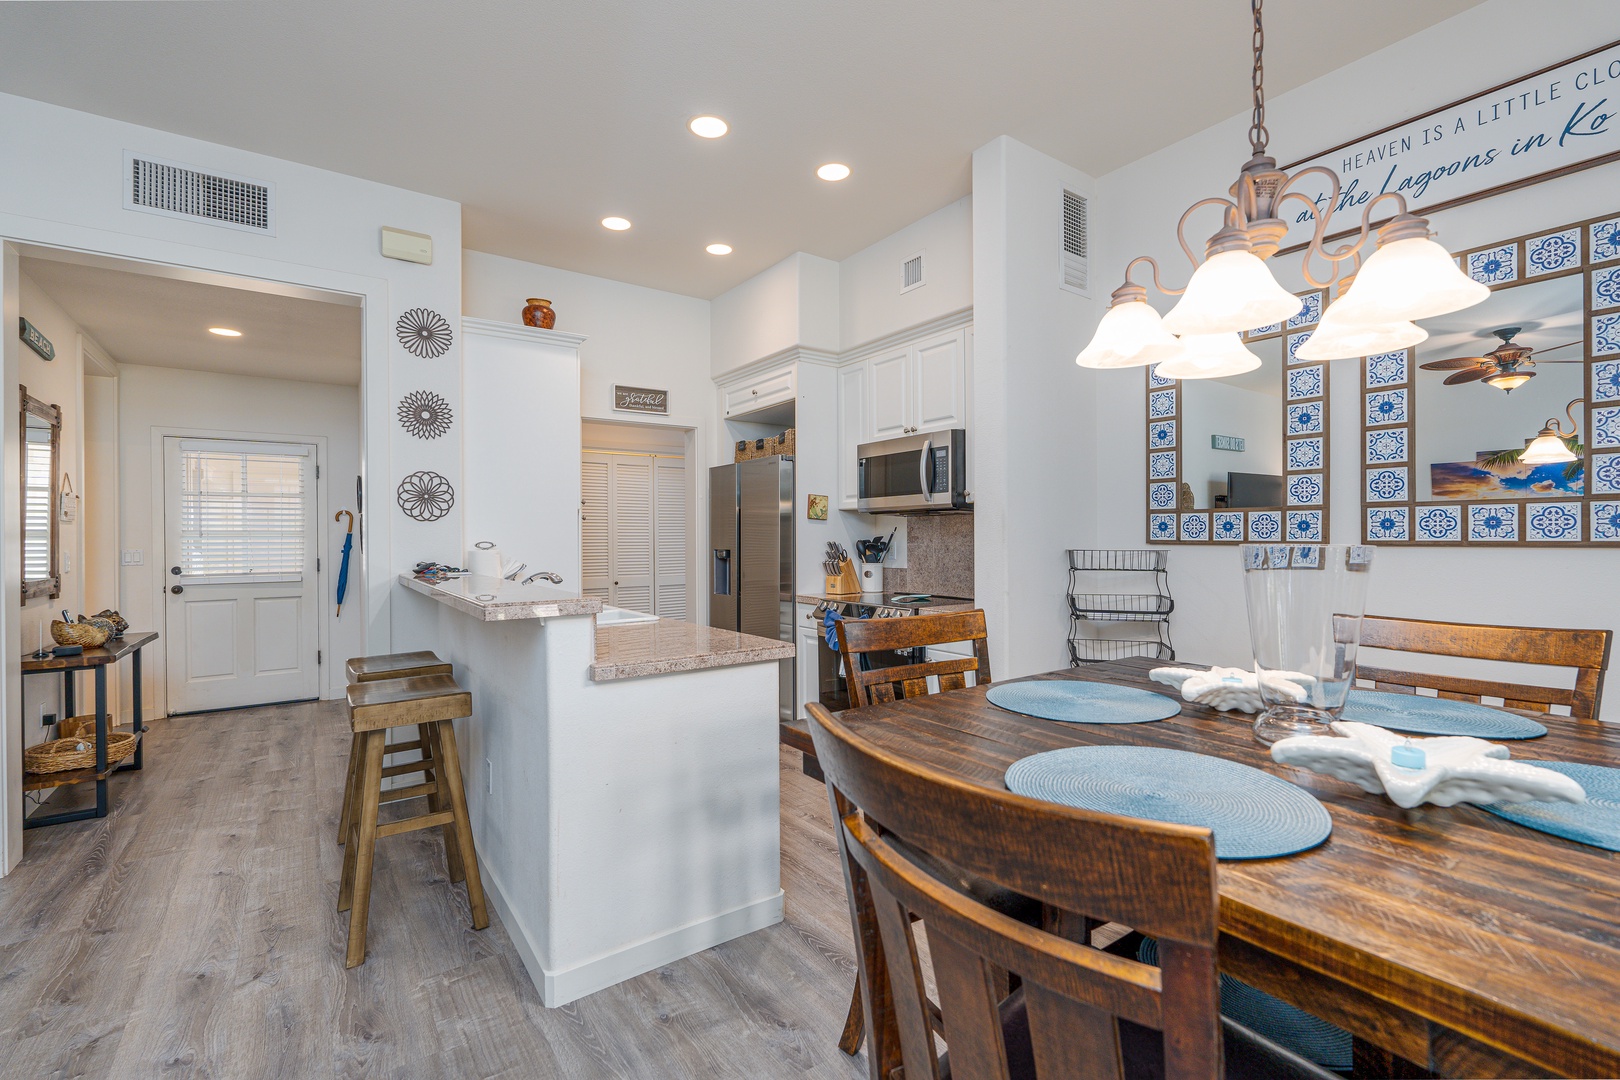 Kapolei Vacation Rentals, Coconut Plantation 1208-2 - The beautiful kitchen with bar seating.